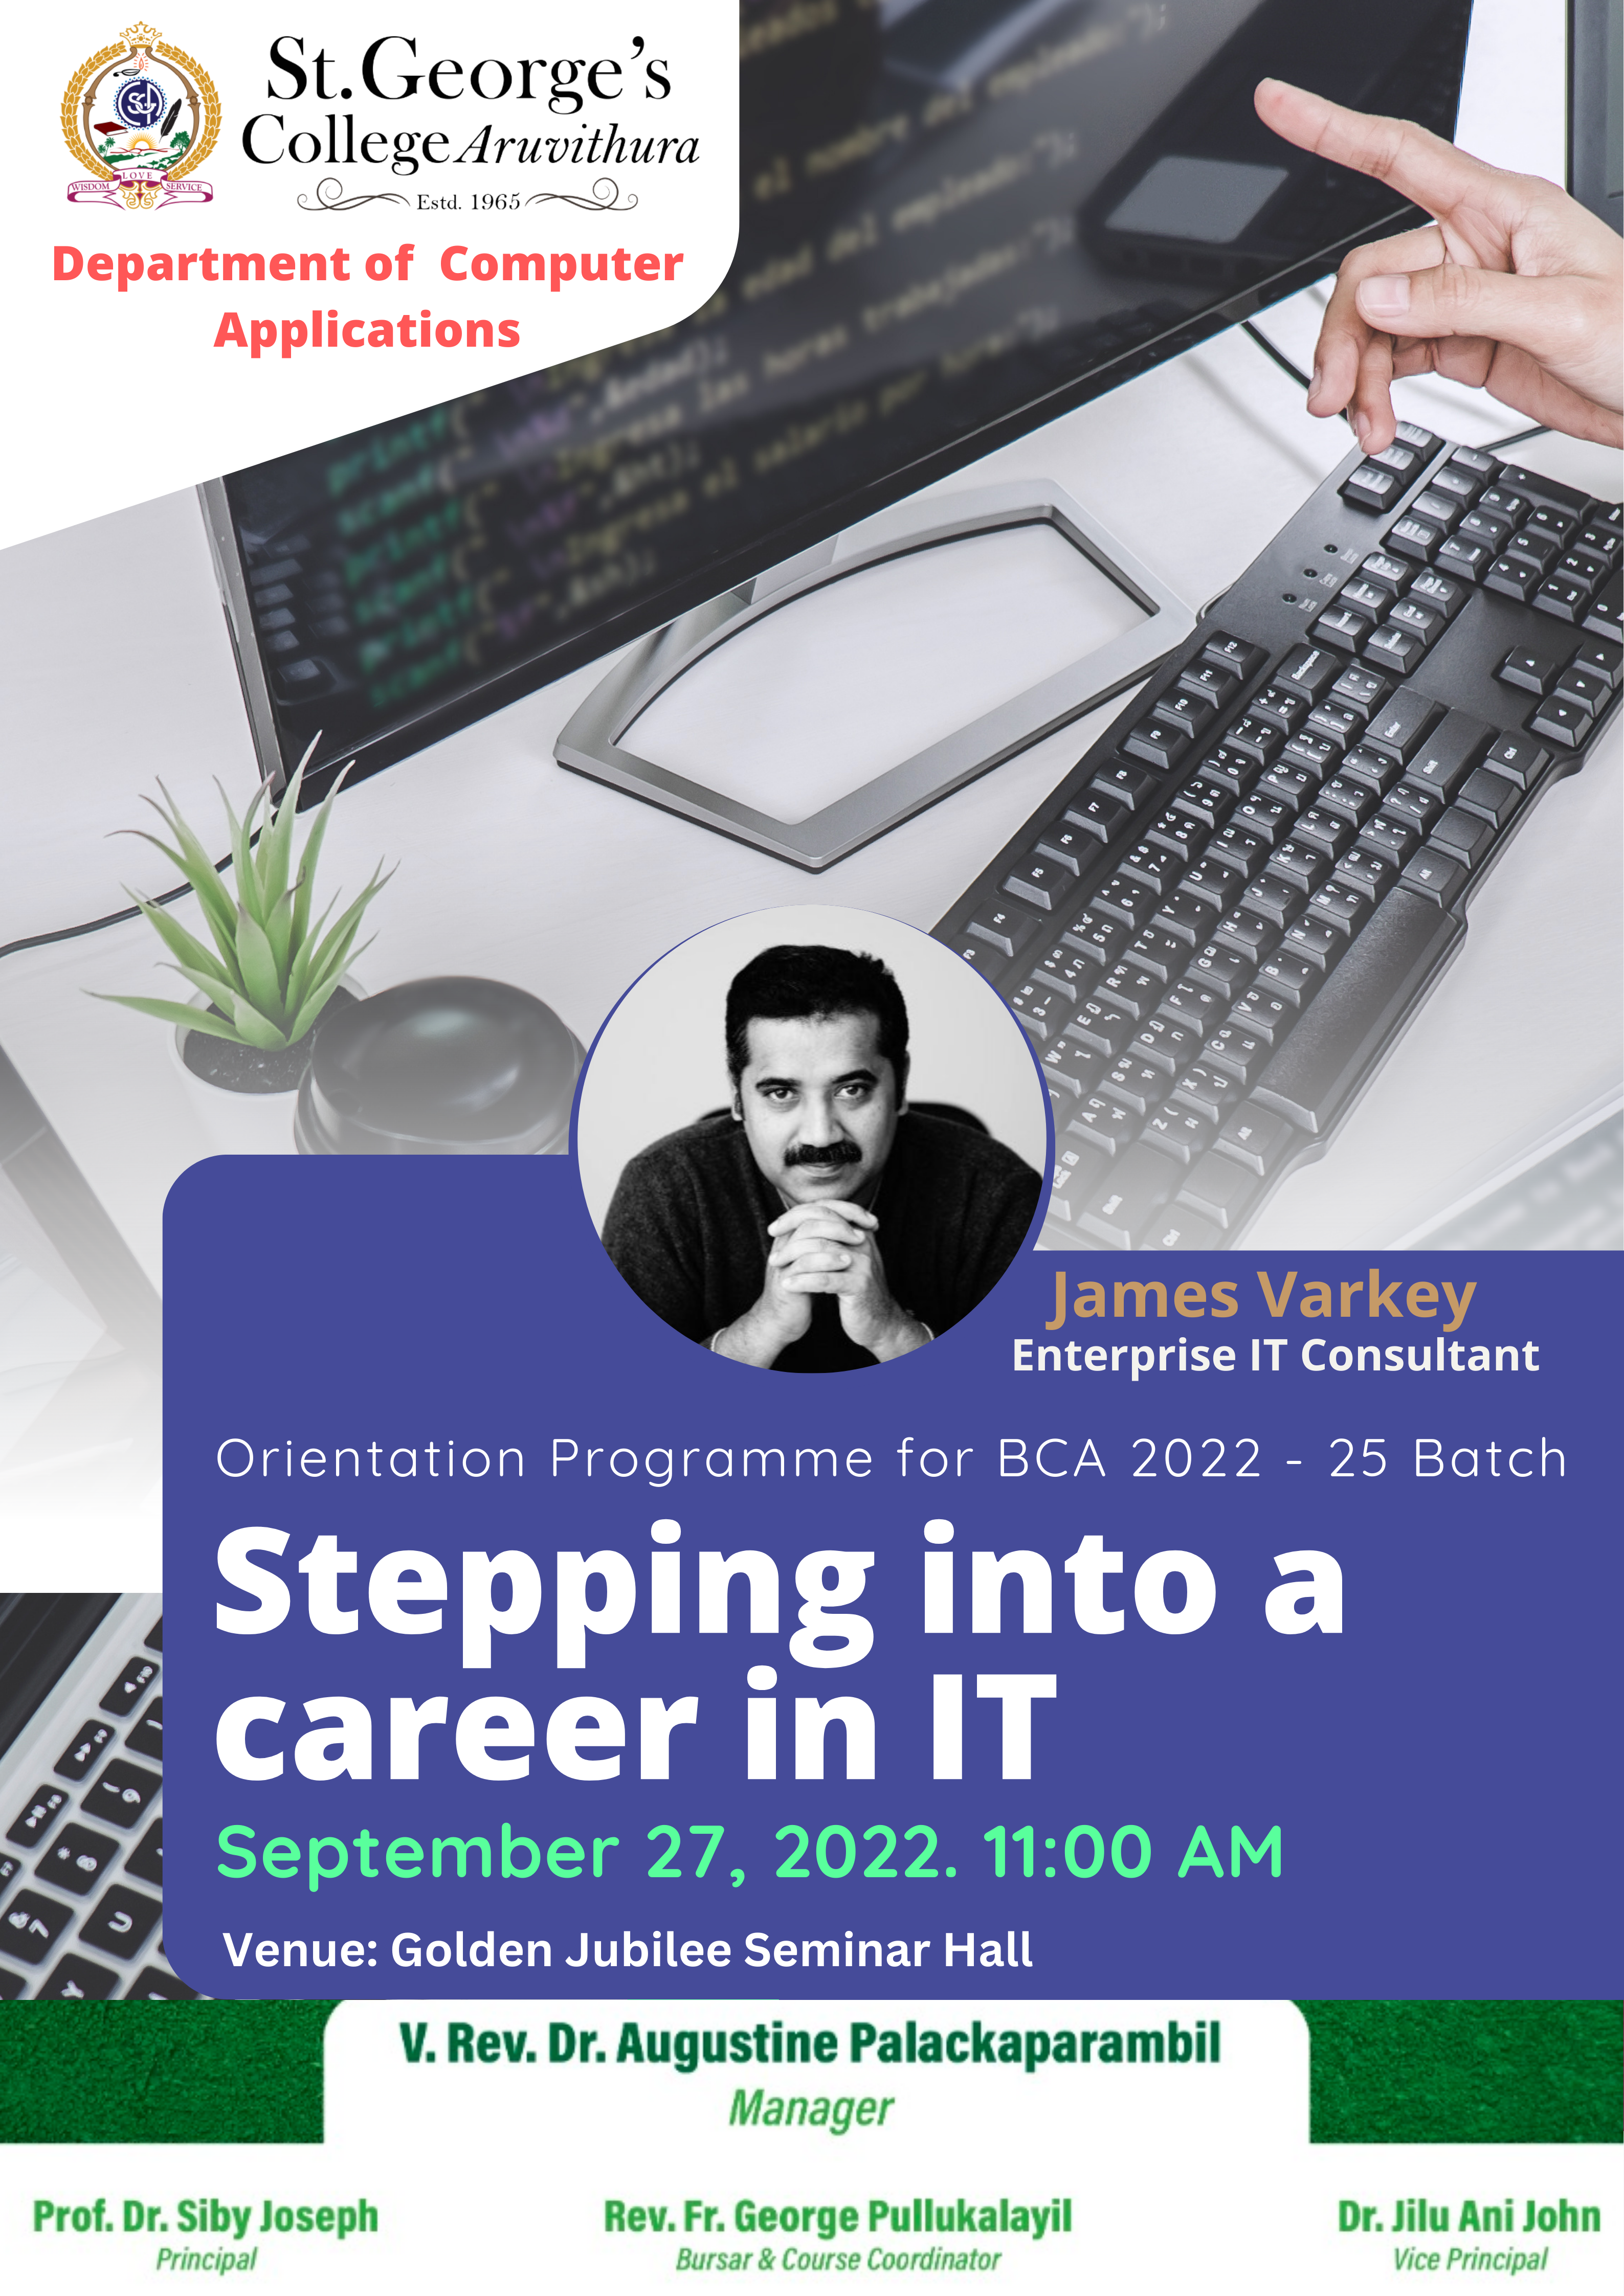 Stepping Into a Career in IT: Orientation Programme for BCA 2022 - 25 batch